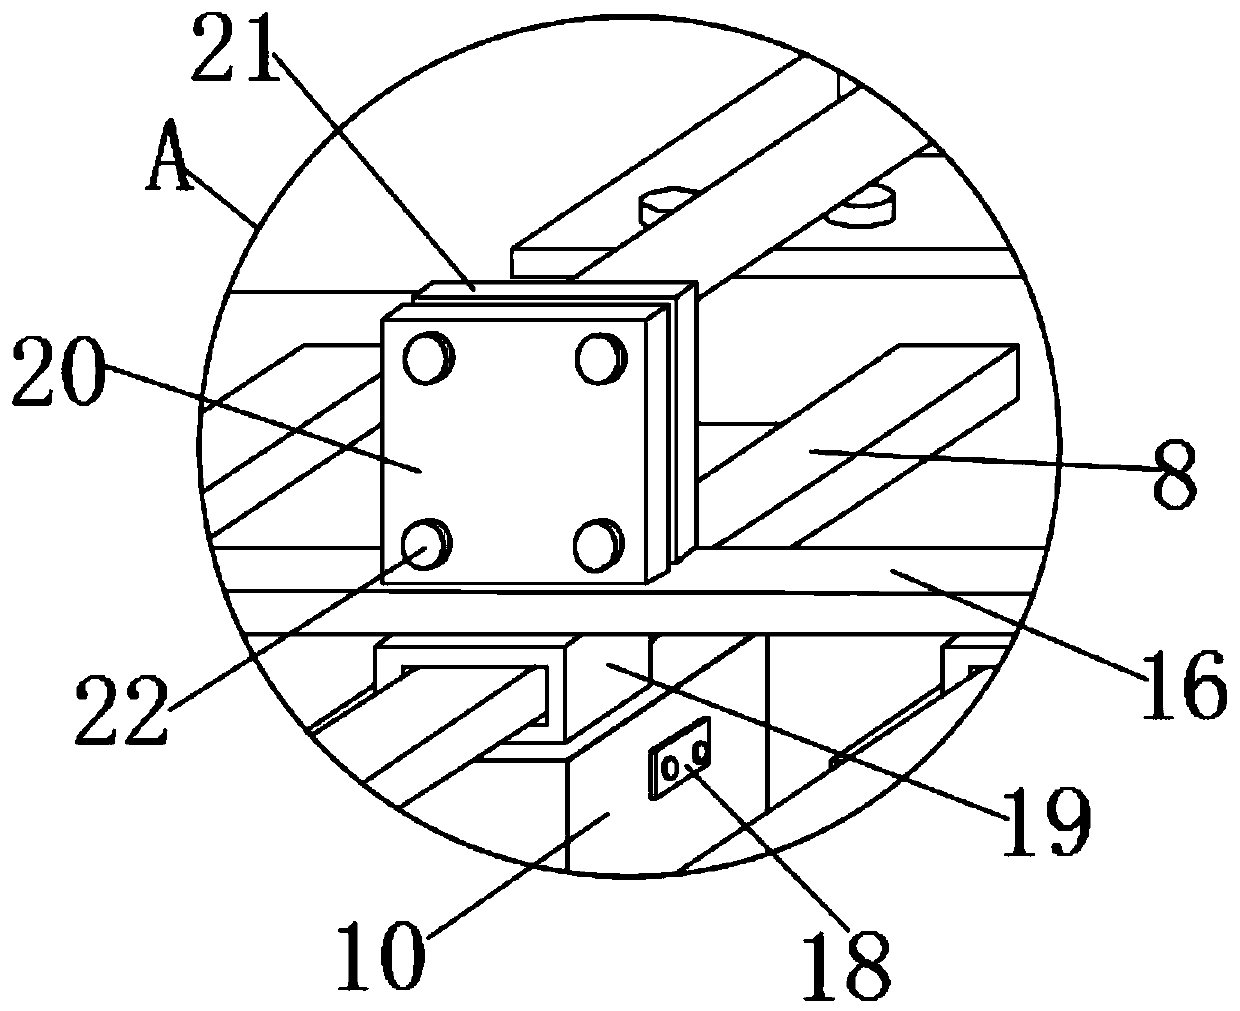 A positioning punching device for building aluminum formwork